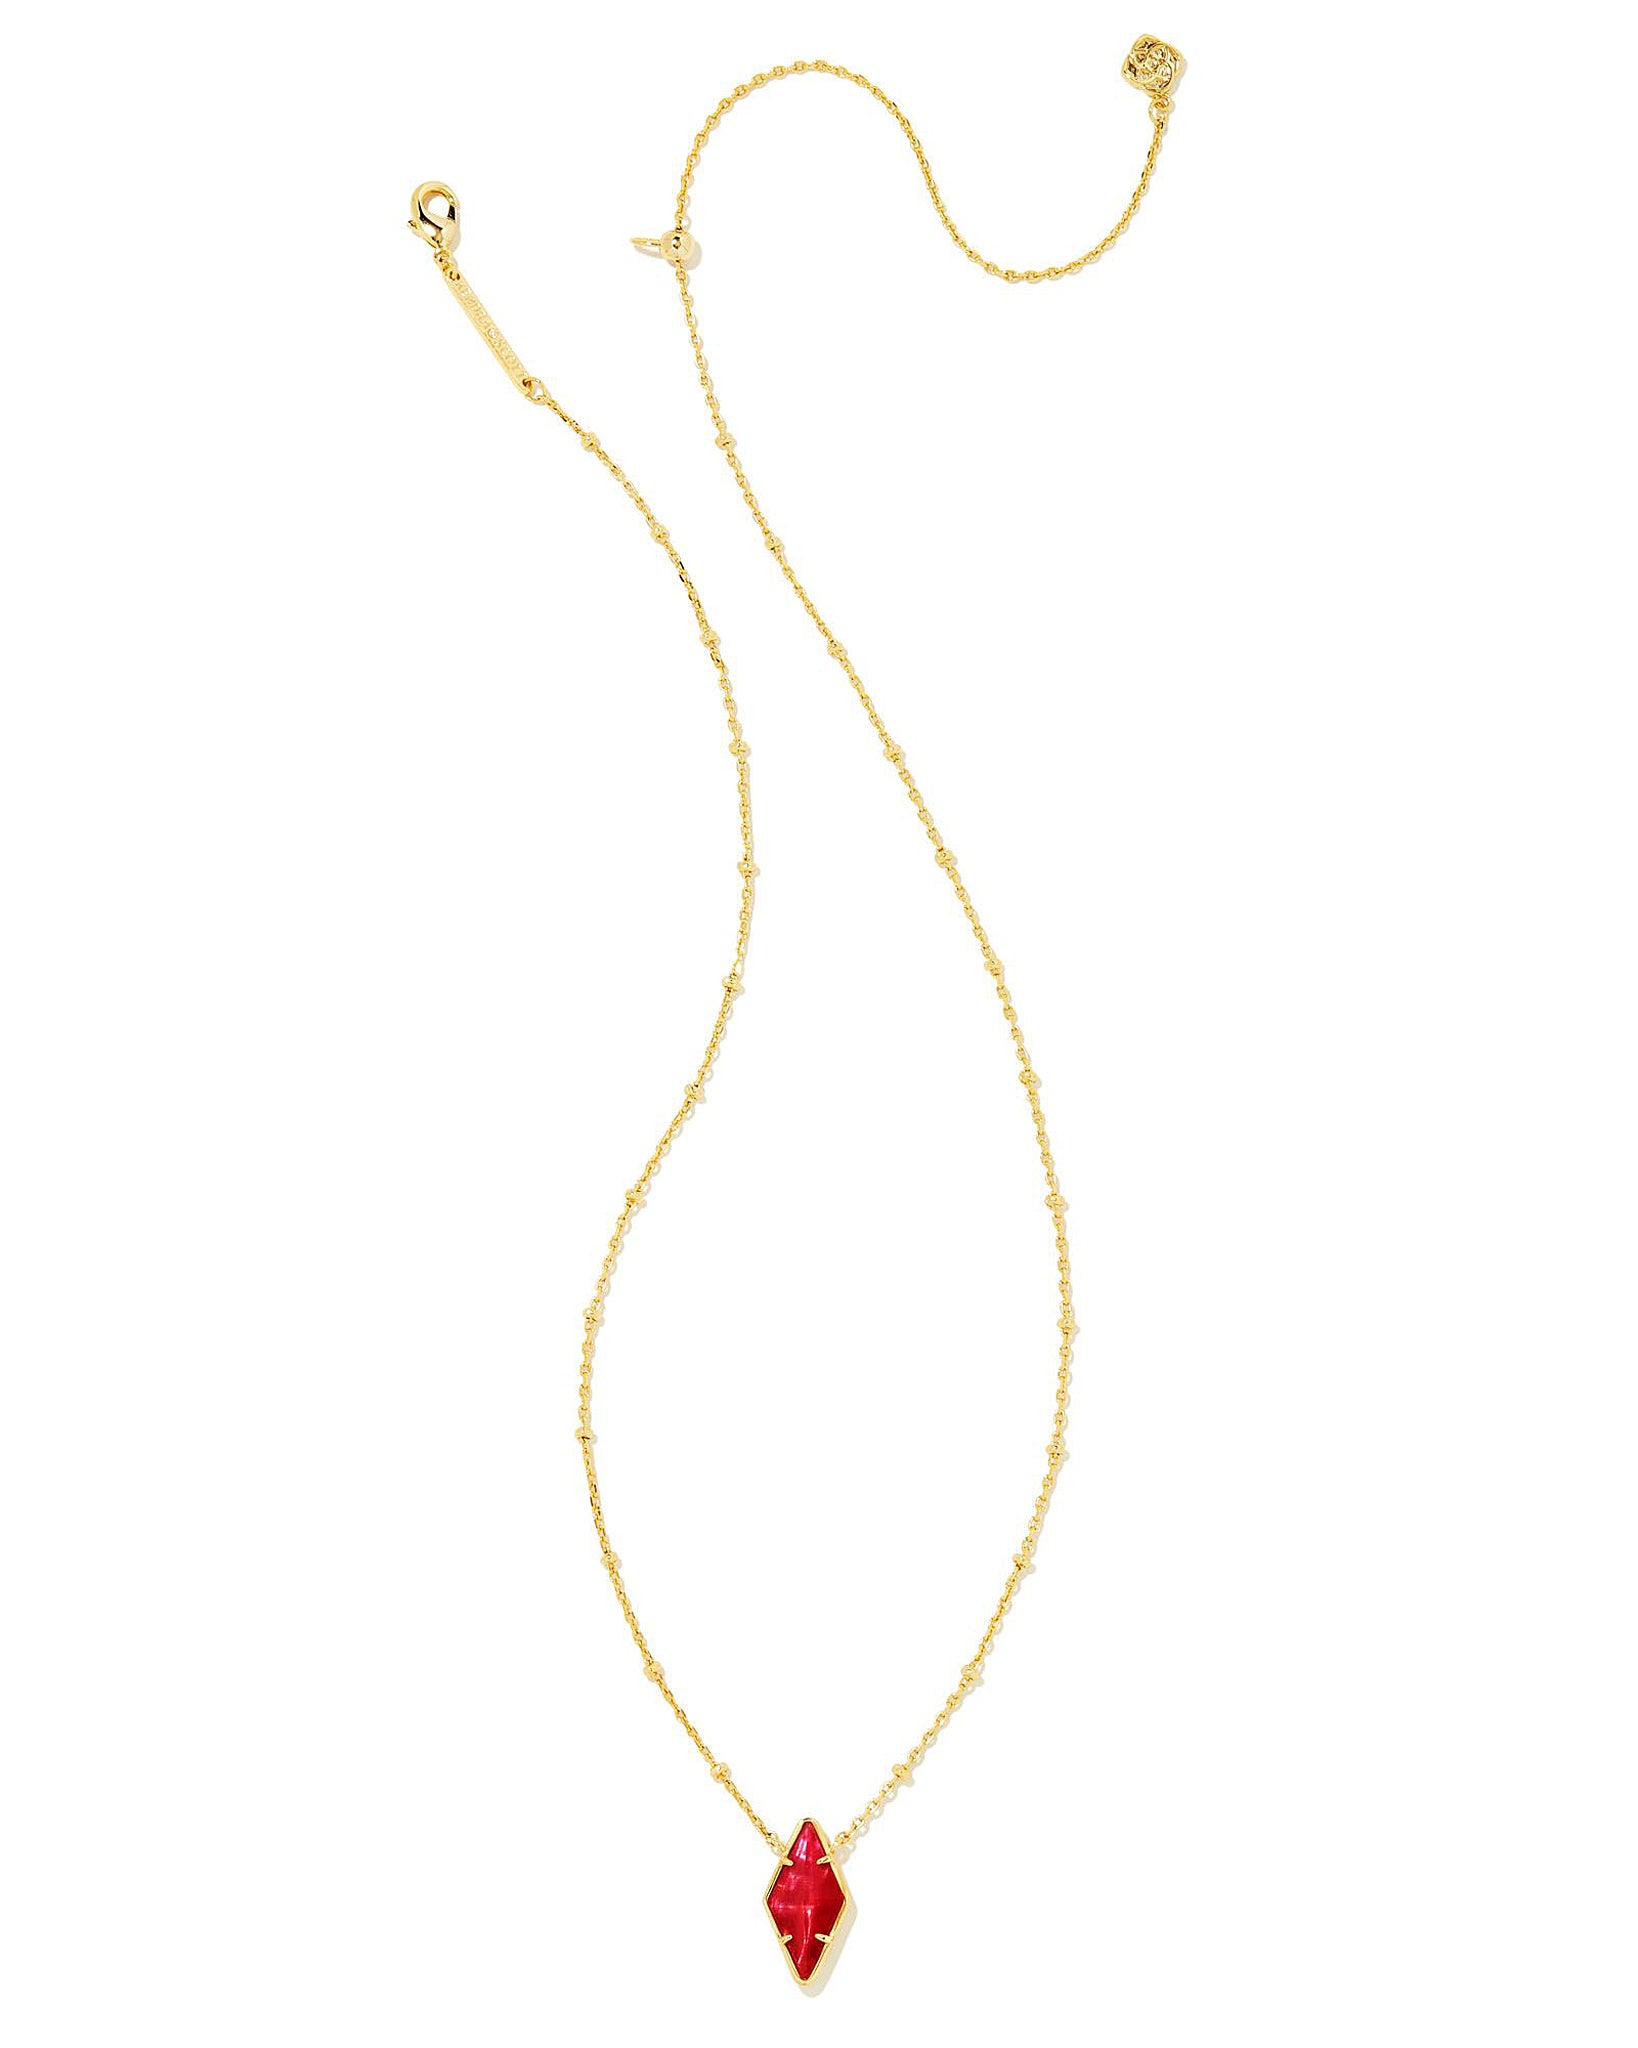 Kendra Scott Kinsley Pendant Necklace in Raspberry Illusion and Gold Plated